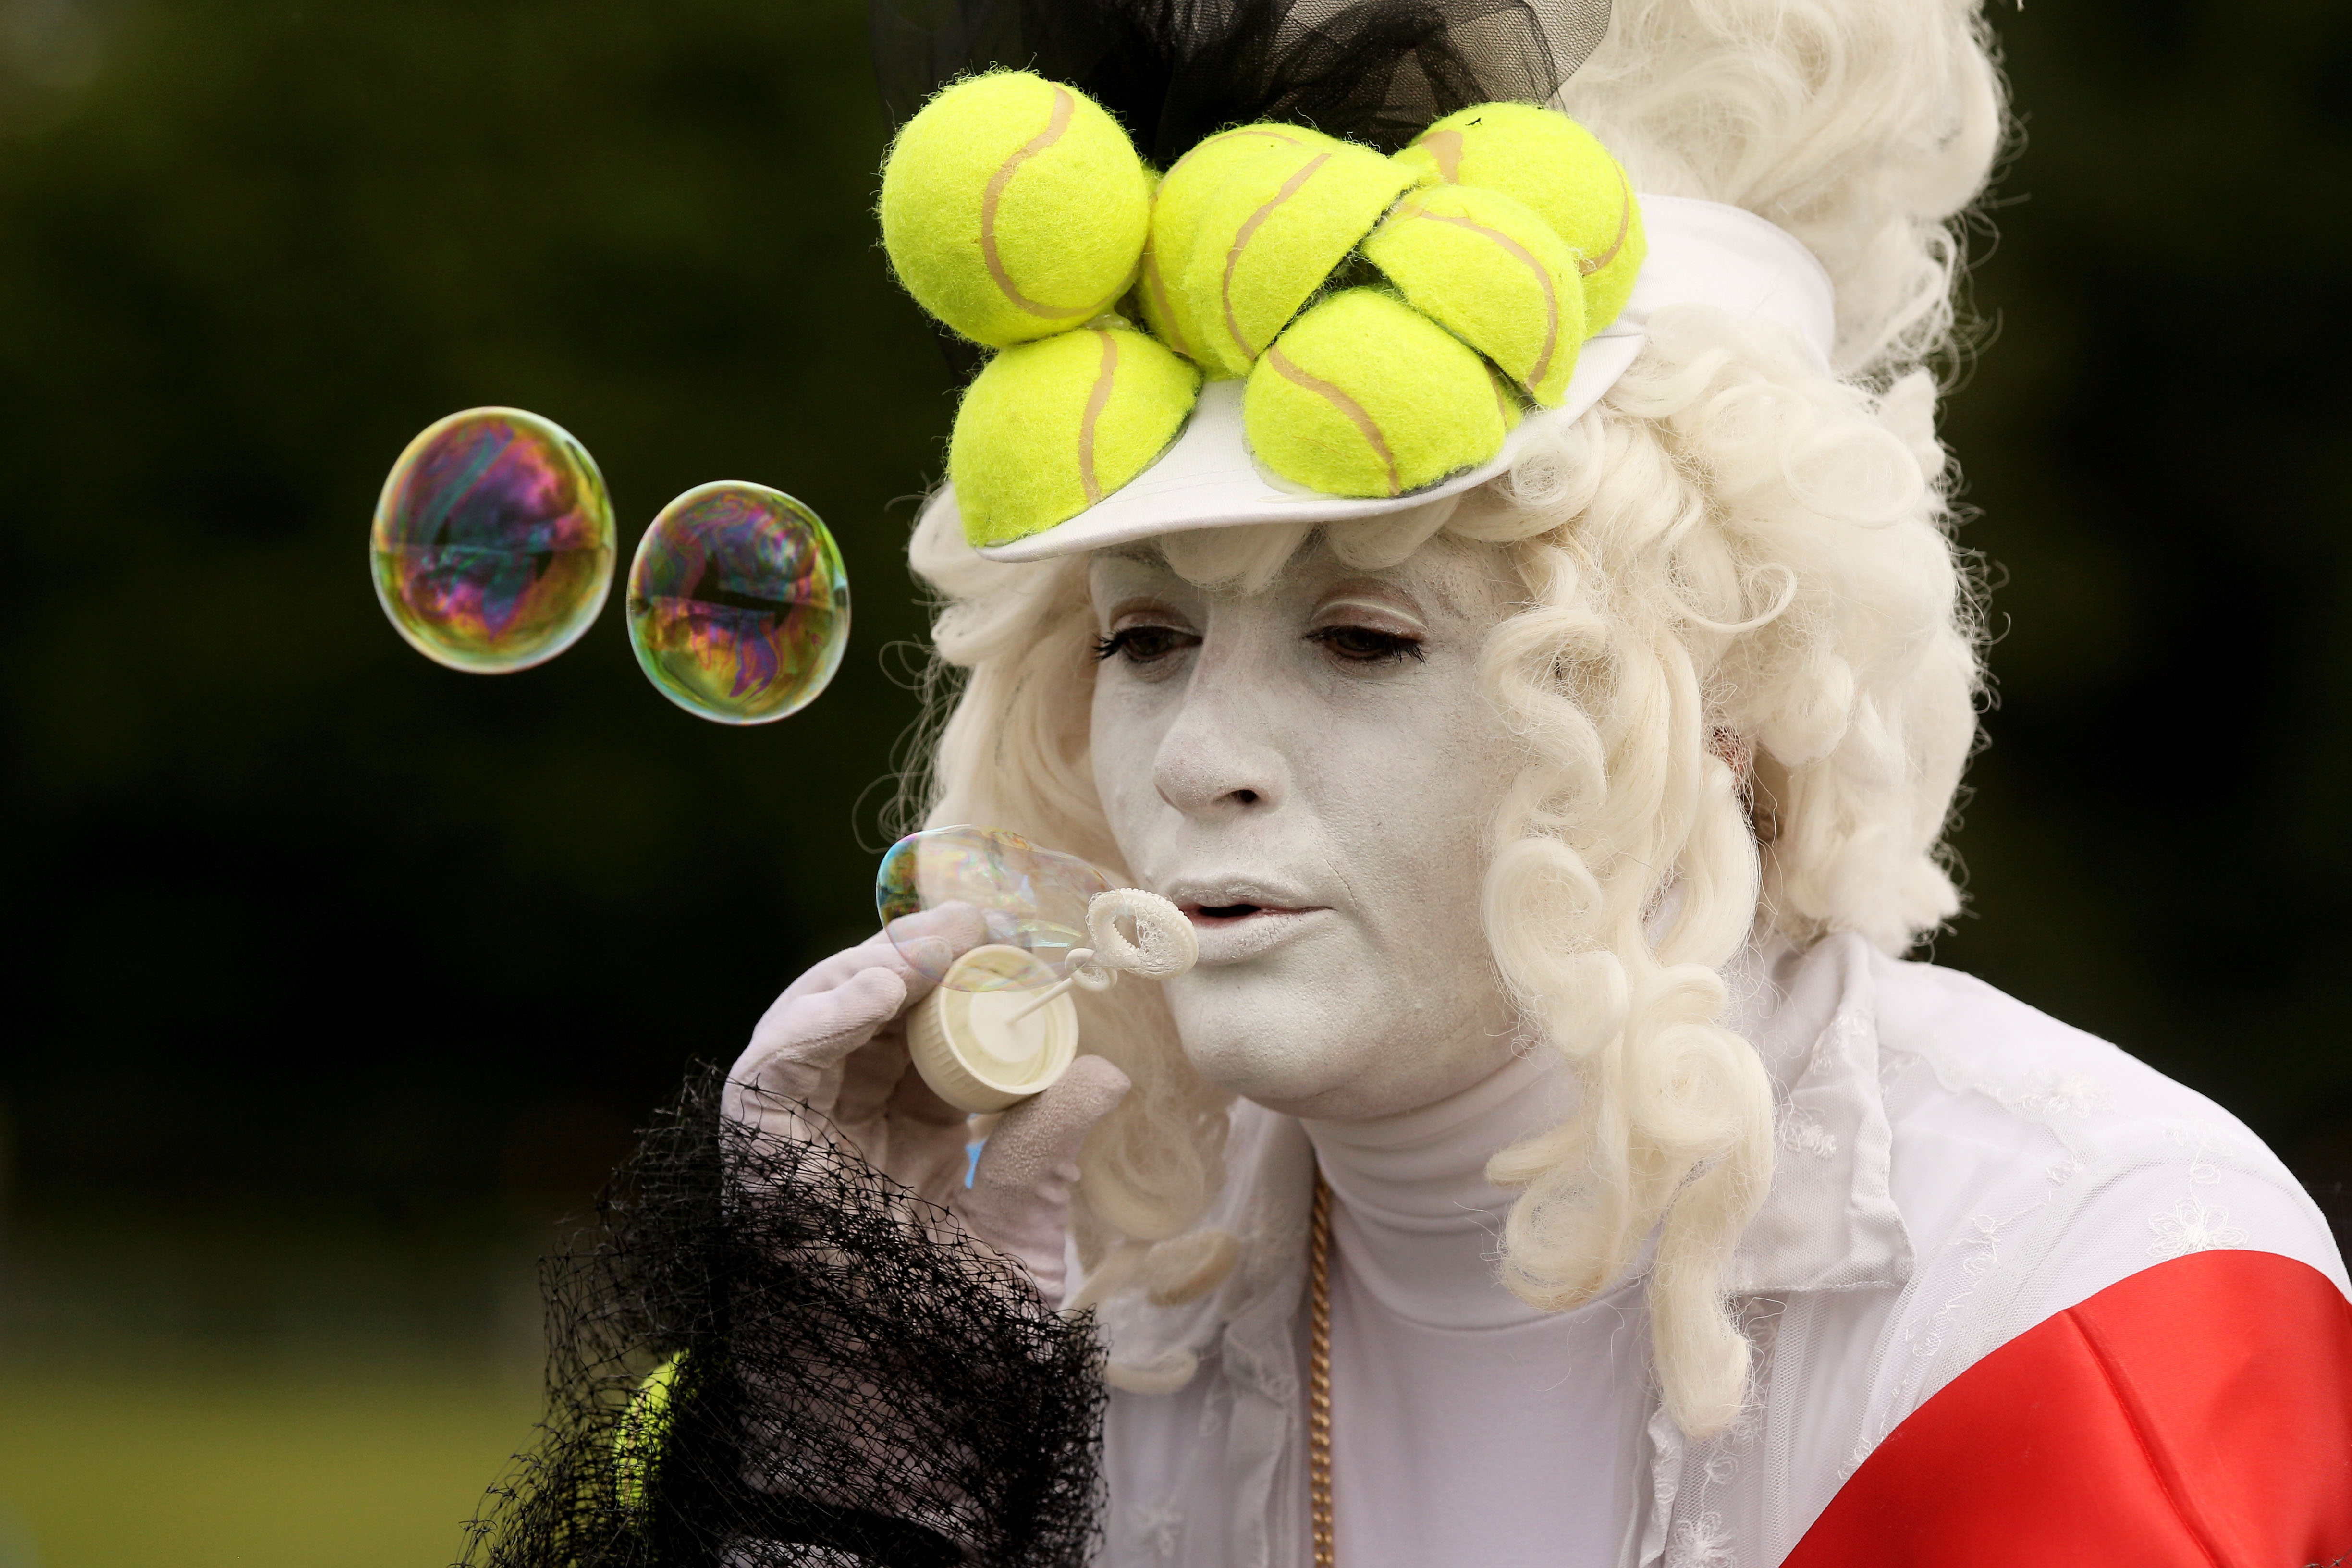 LONDON, ENGLAND - JUNE 21:  A tennis fan blows bubbles while waiting in a queue to enter the grounds on Day Two of the Wimbledon Lawn Tennis Championships at the All England Lawn Tennis and Croquet Club on June 21, 2011 in London, England.  (Photo by Oli